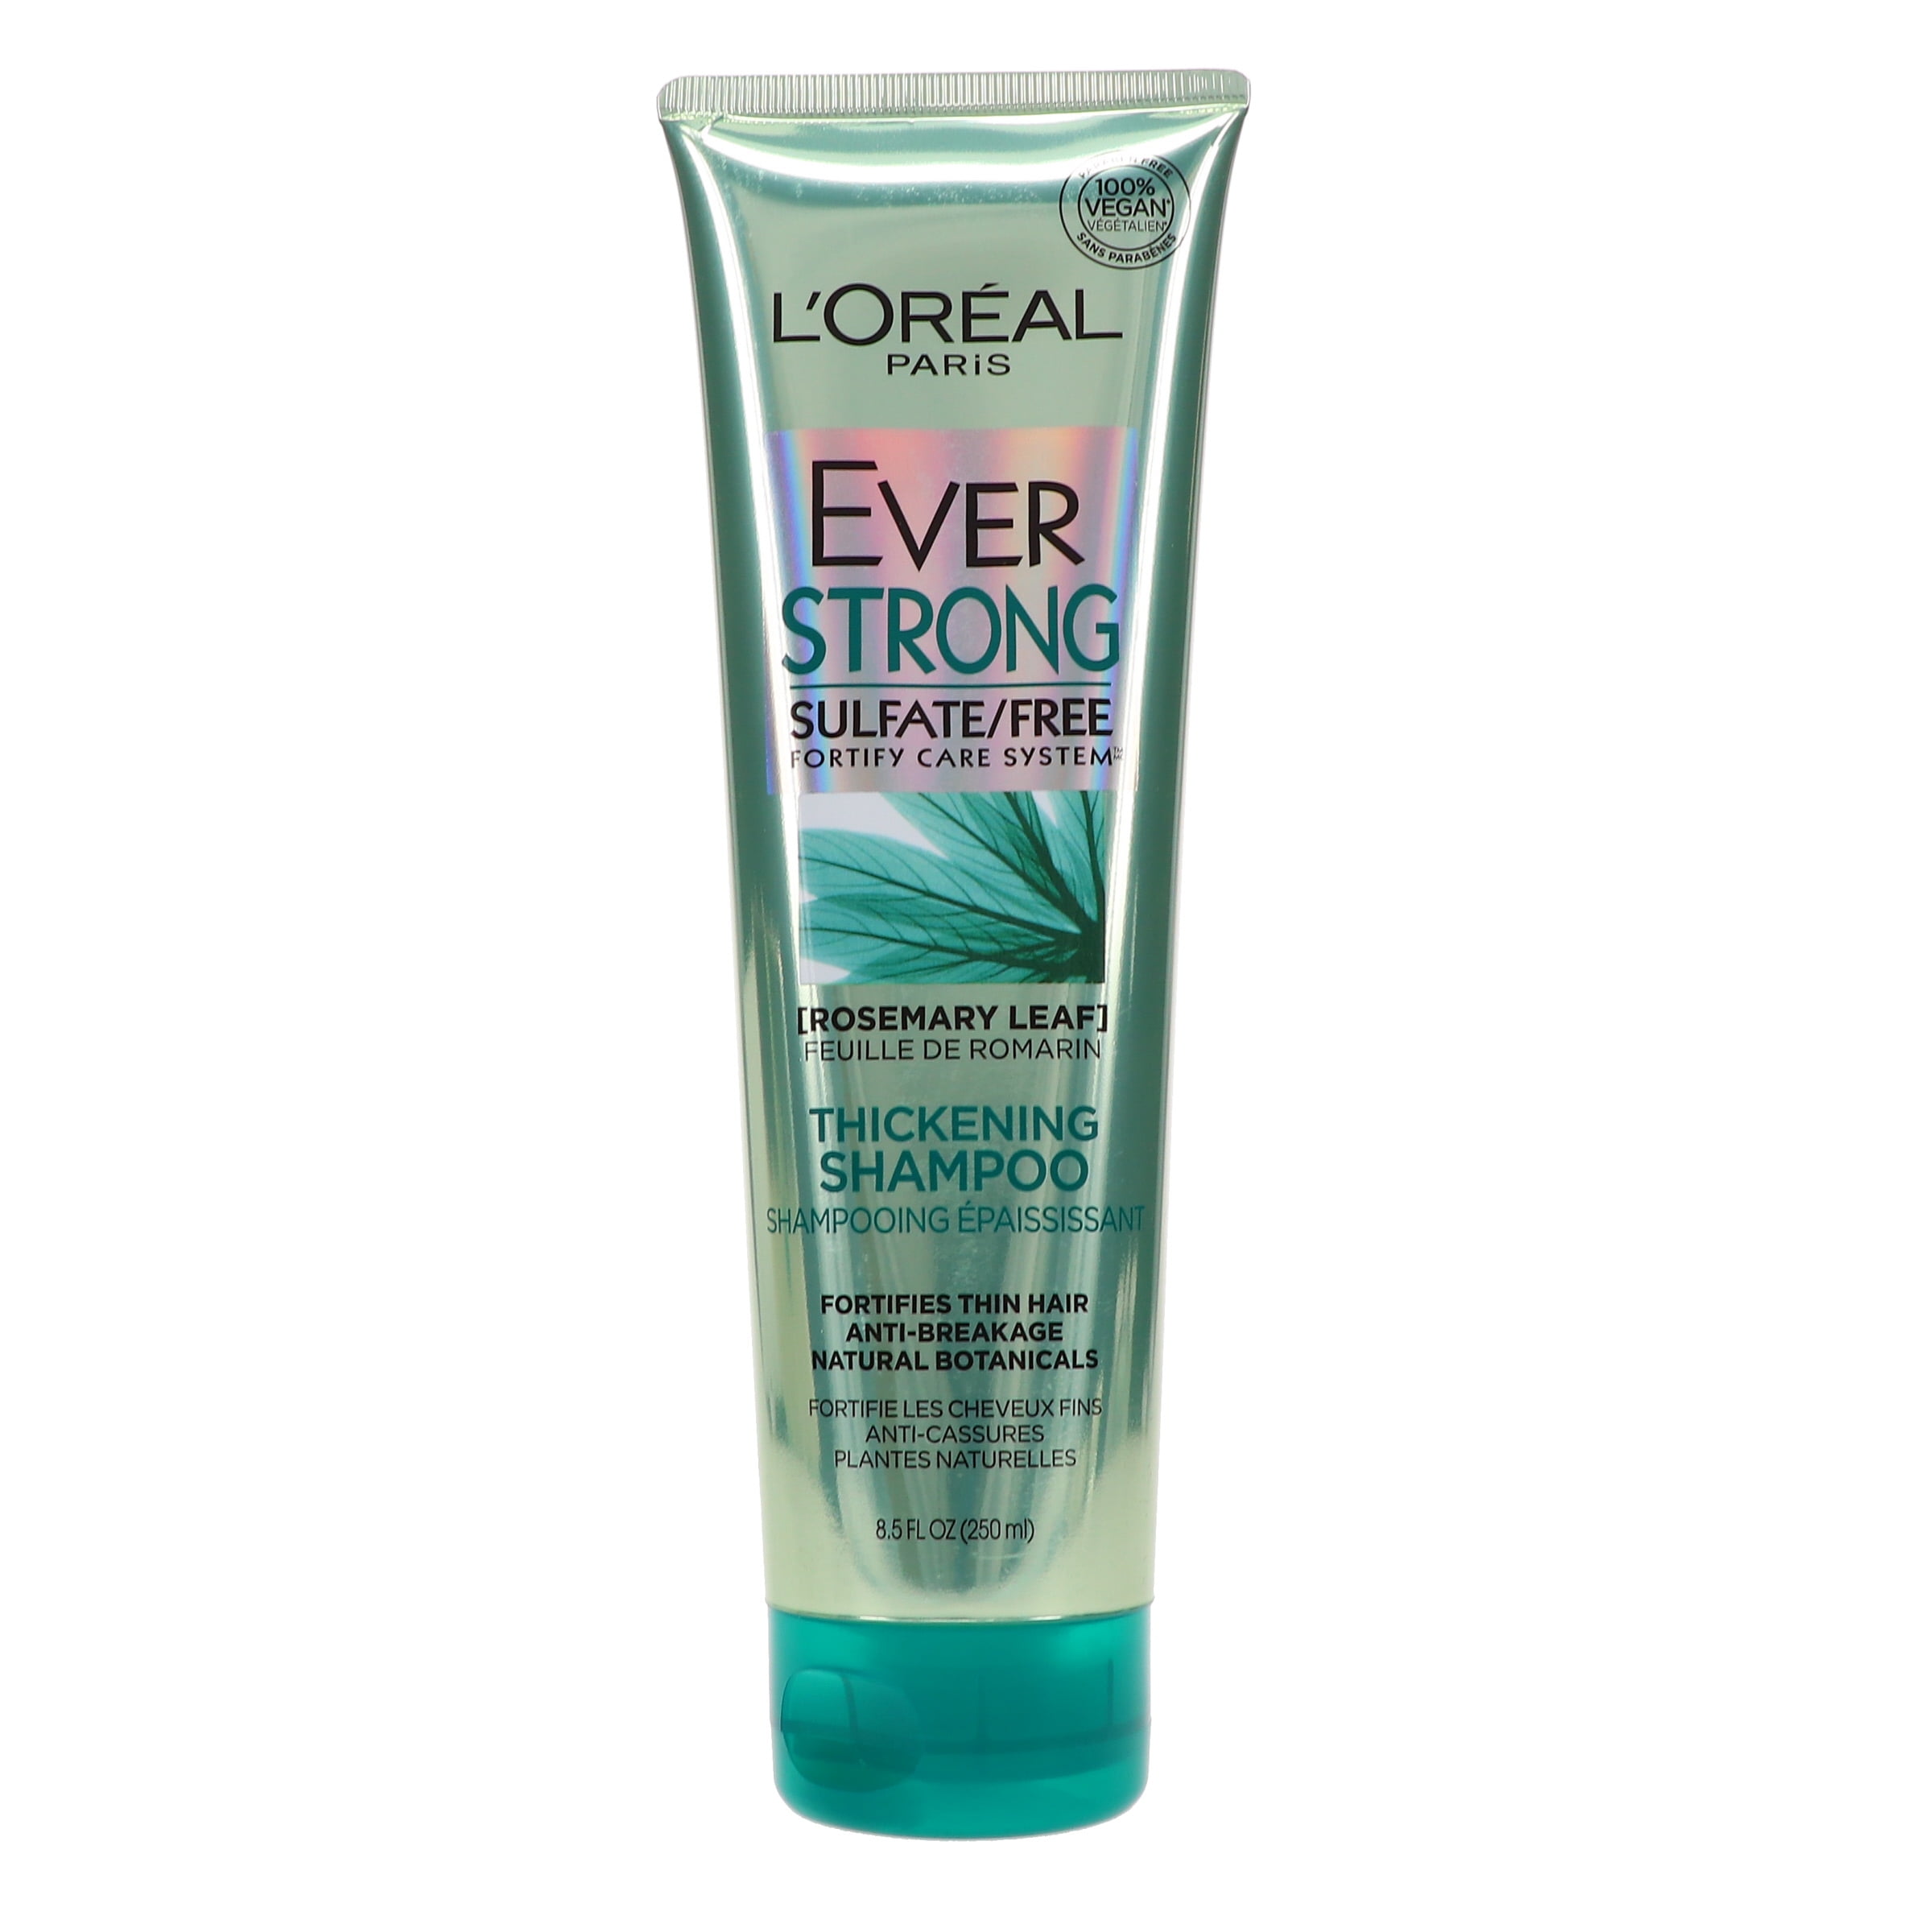 L'Oreal Paris EverStrong Thickening Sulfate Free Shampoo for Thin hair, 8.5 fl oz